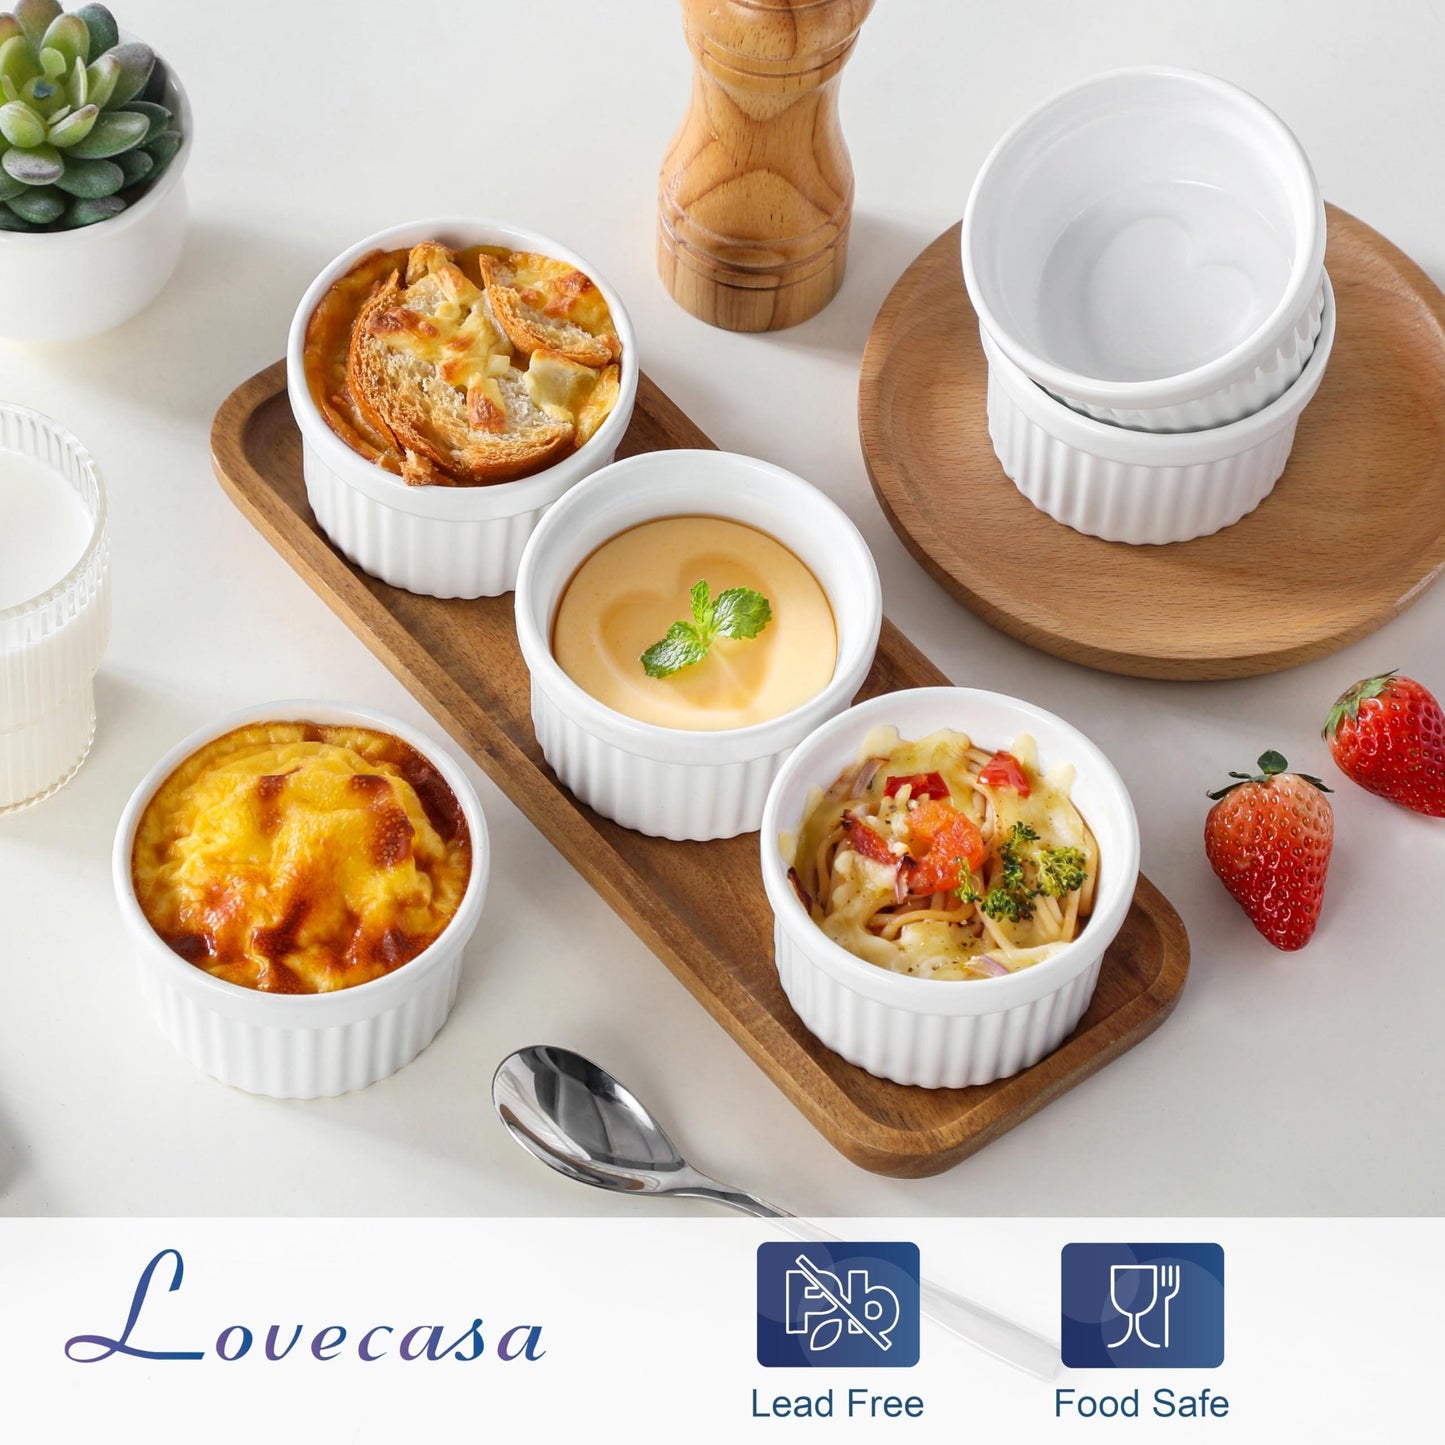 LOVECASA Ramekins 6 oz for Creme Brulee, Porcelain White Ramiken Set Souffle Dishes Oven Safe for Baking Lava Cakes, Puddings, Custards Cups and Dipping Sauces Bowls, Set of 6 - CookCave